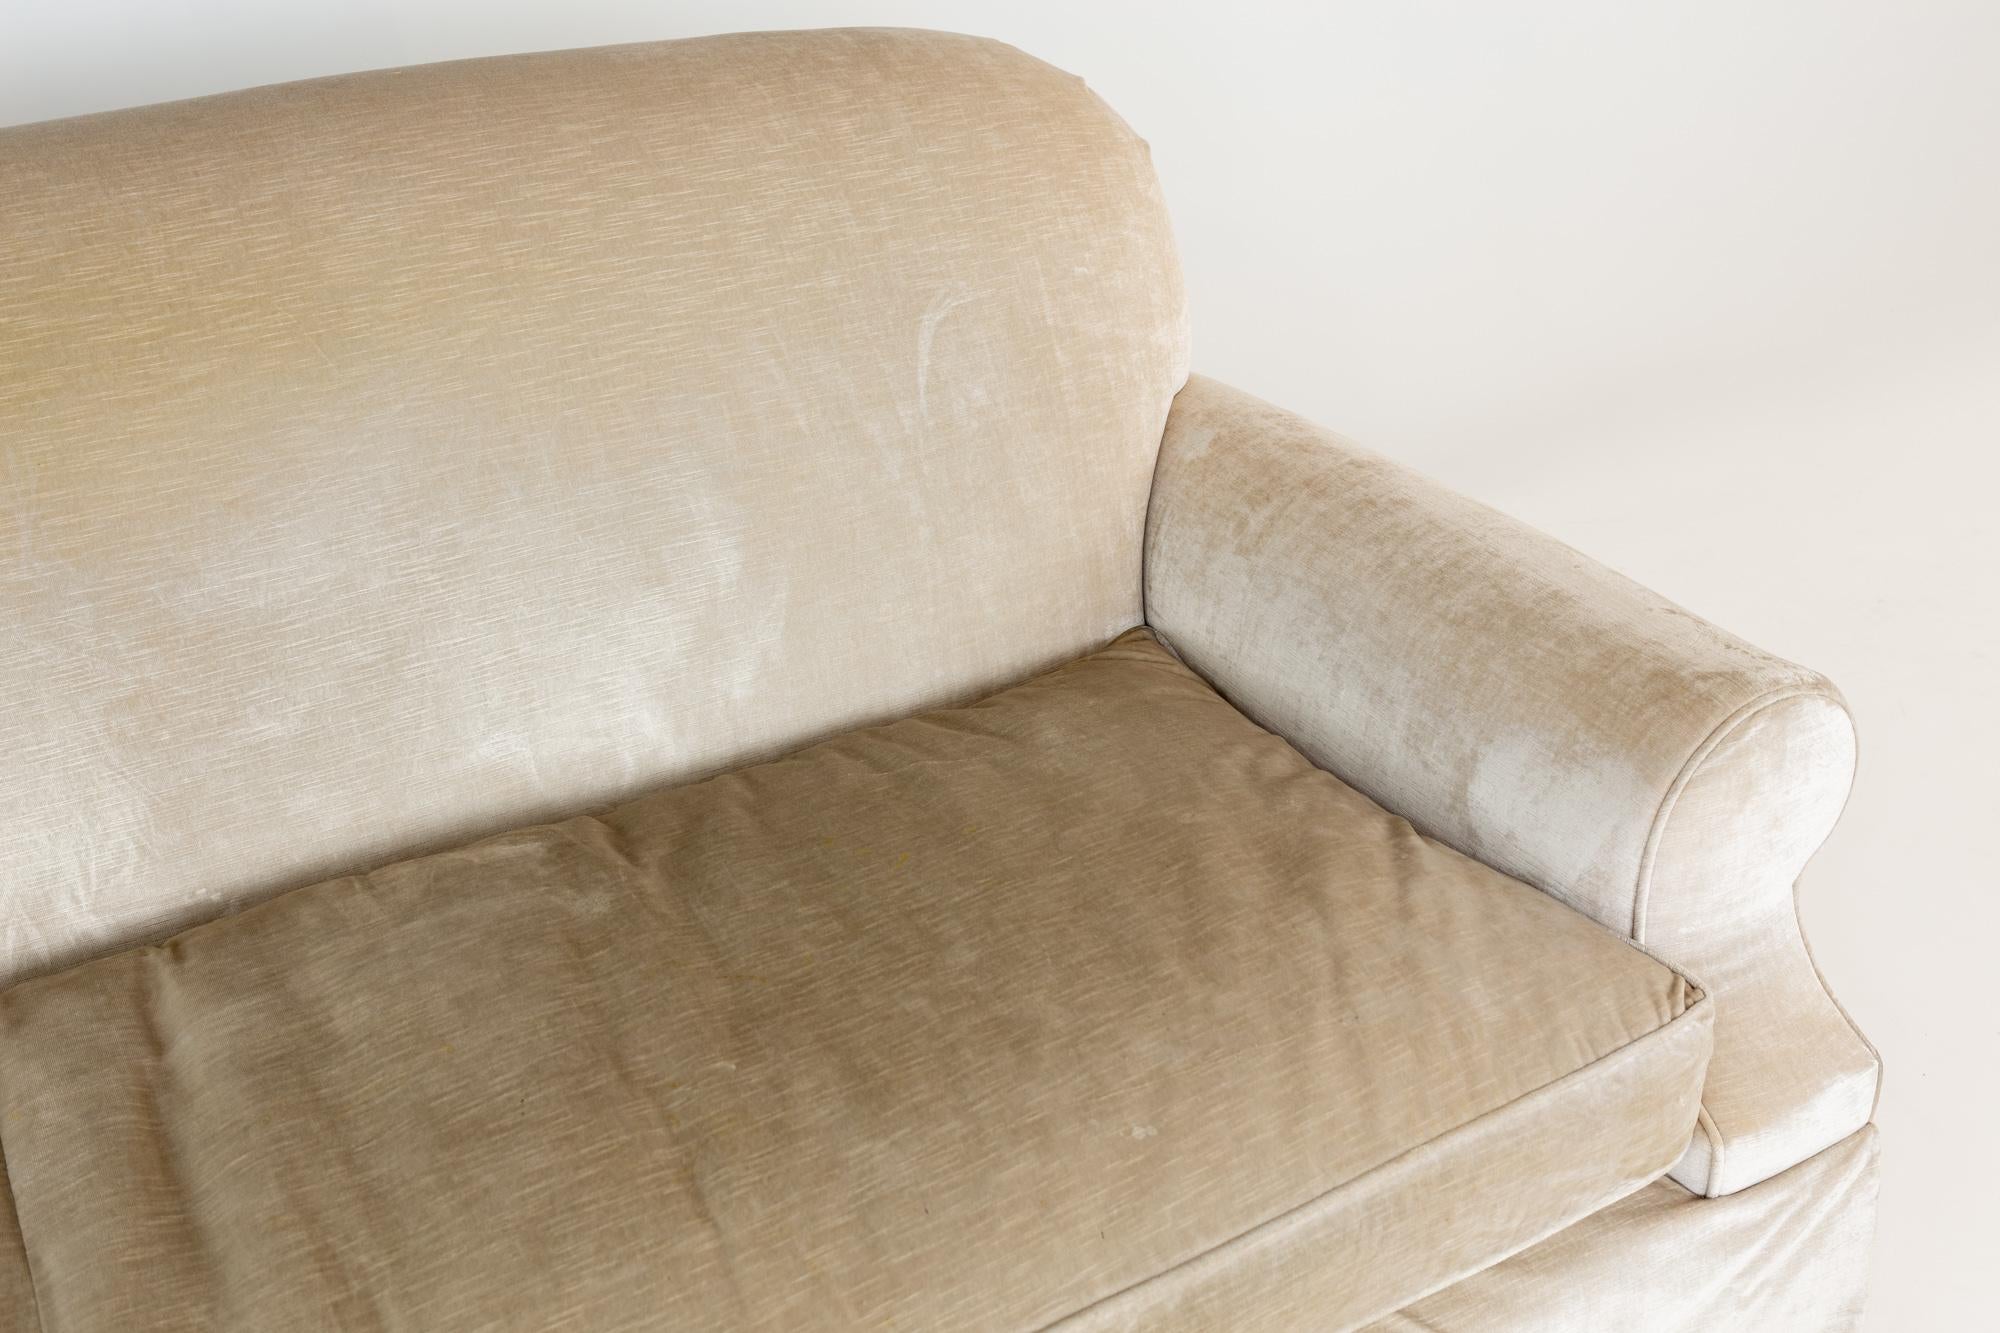 Swaim Contemporary Cream Colored Sofa in Mohair In Good Condition For Sale In Countryside, IL